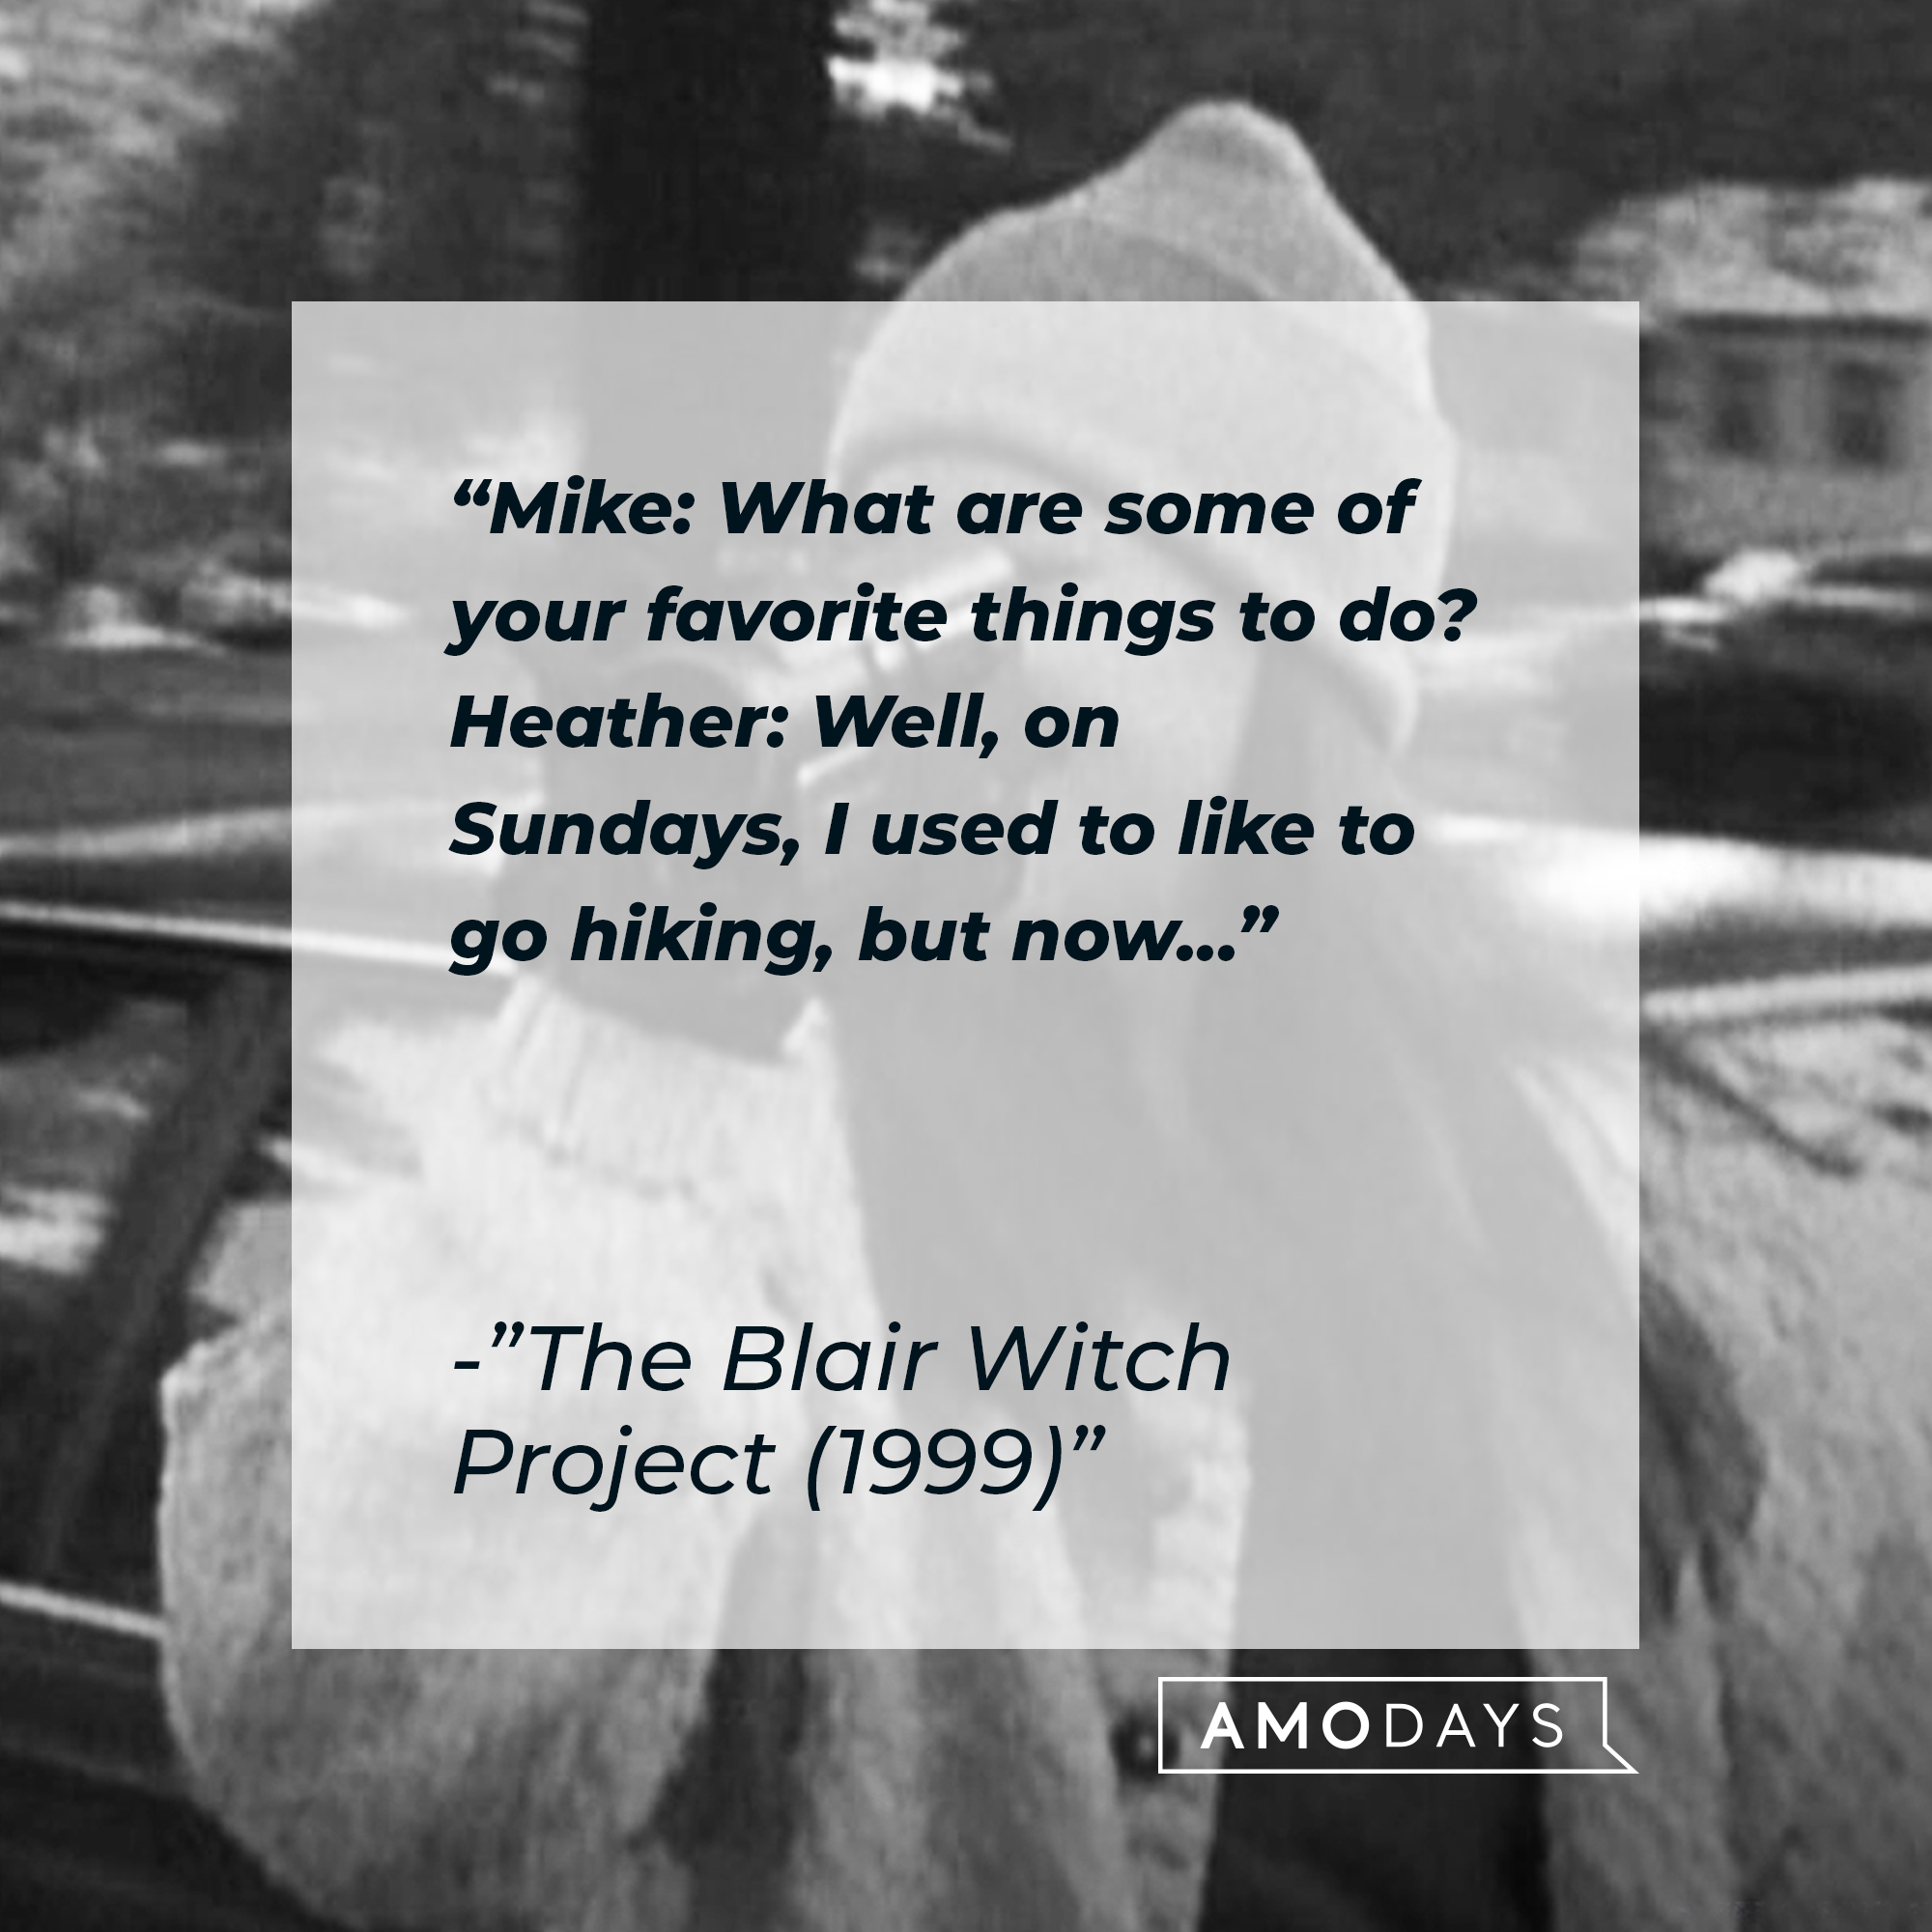 “The Blair Witch Project (1999)” dialogue: “Mike: What are some of your favorite things to do? Heather: Well, on Sundays, I used to like to go hiking, but now...” | Source: facebook.com/blairwitchmovie